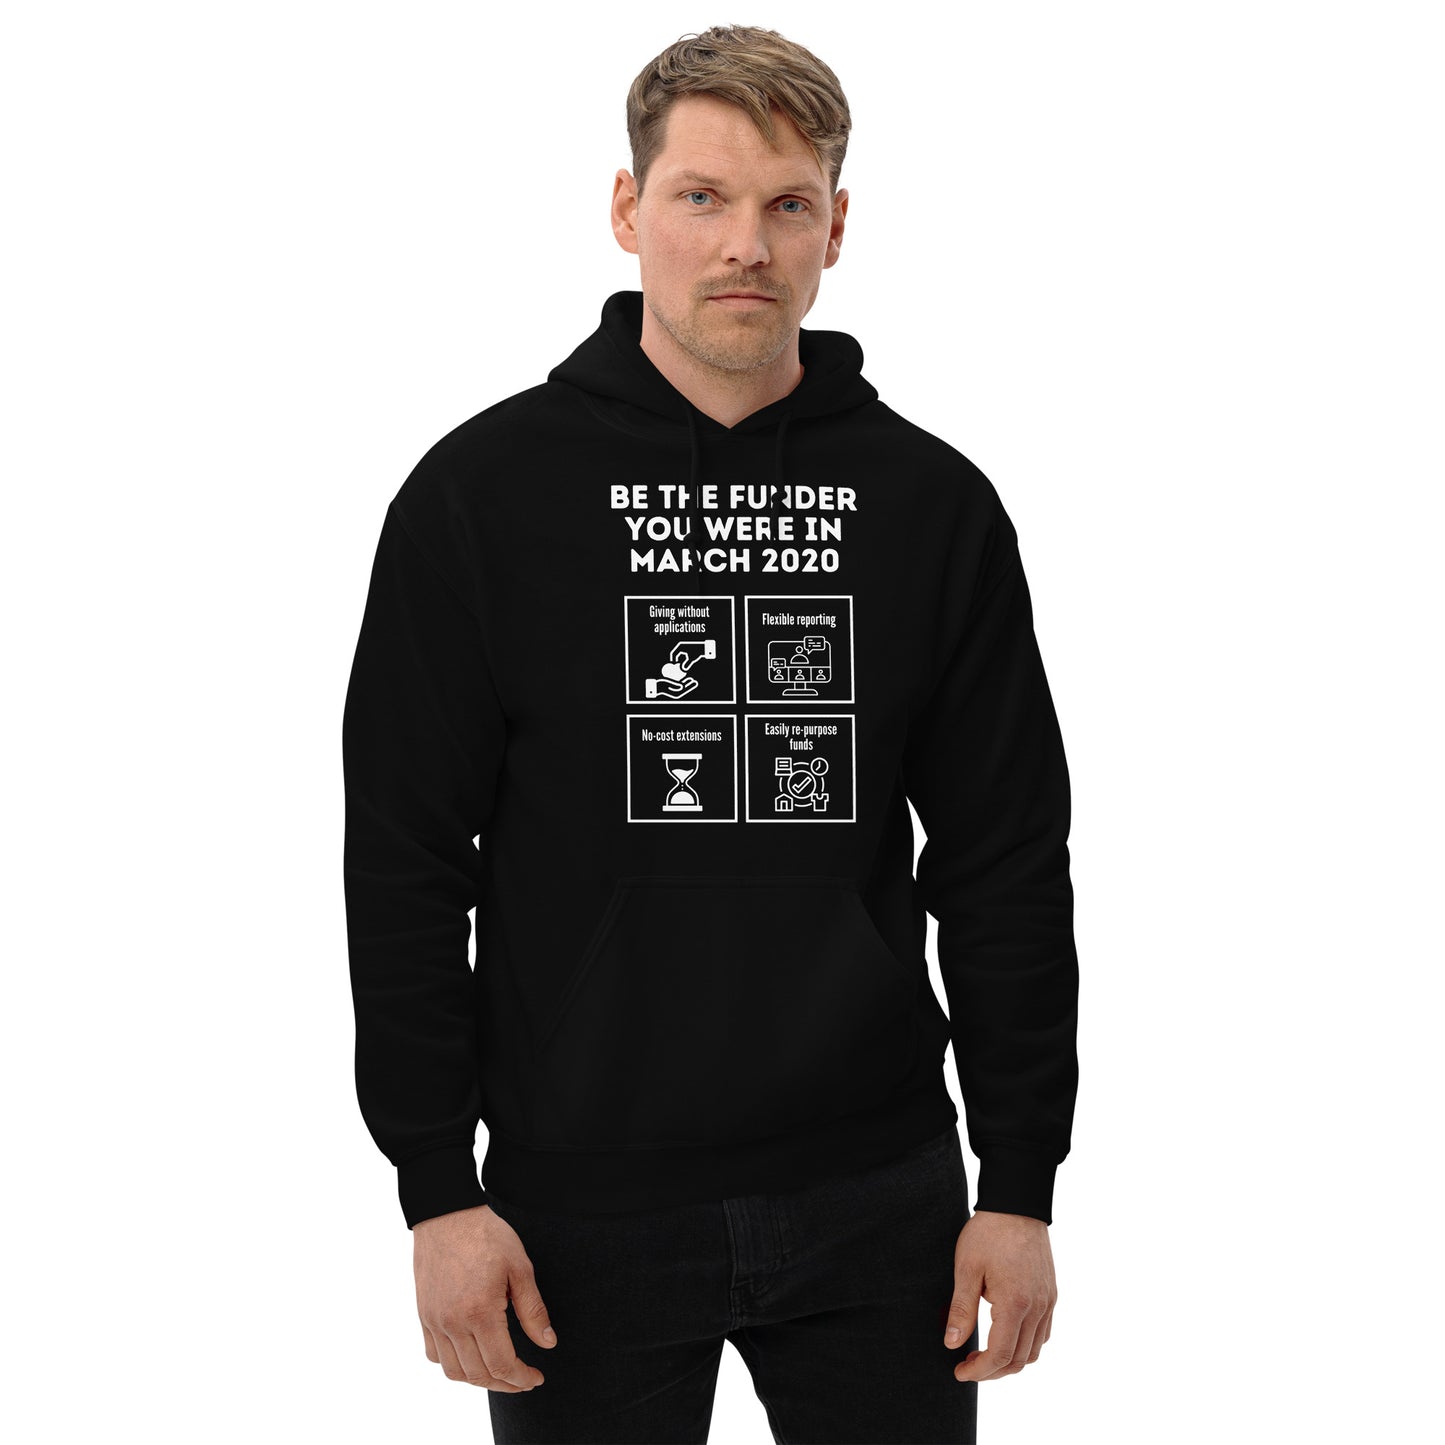 Be the Funder You Were in March 2020 Unisex Hoodie